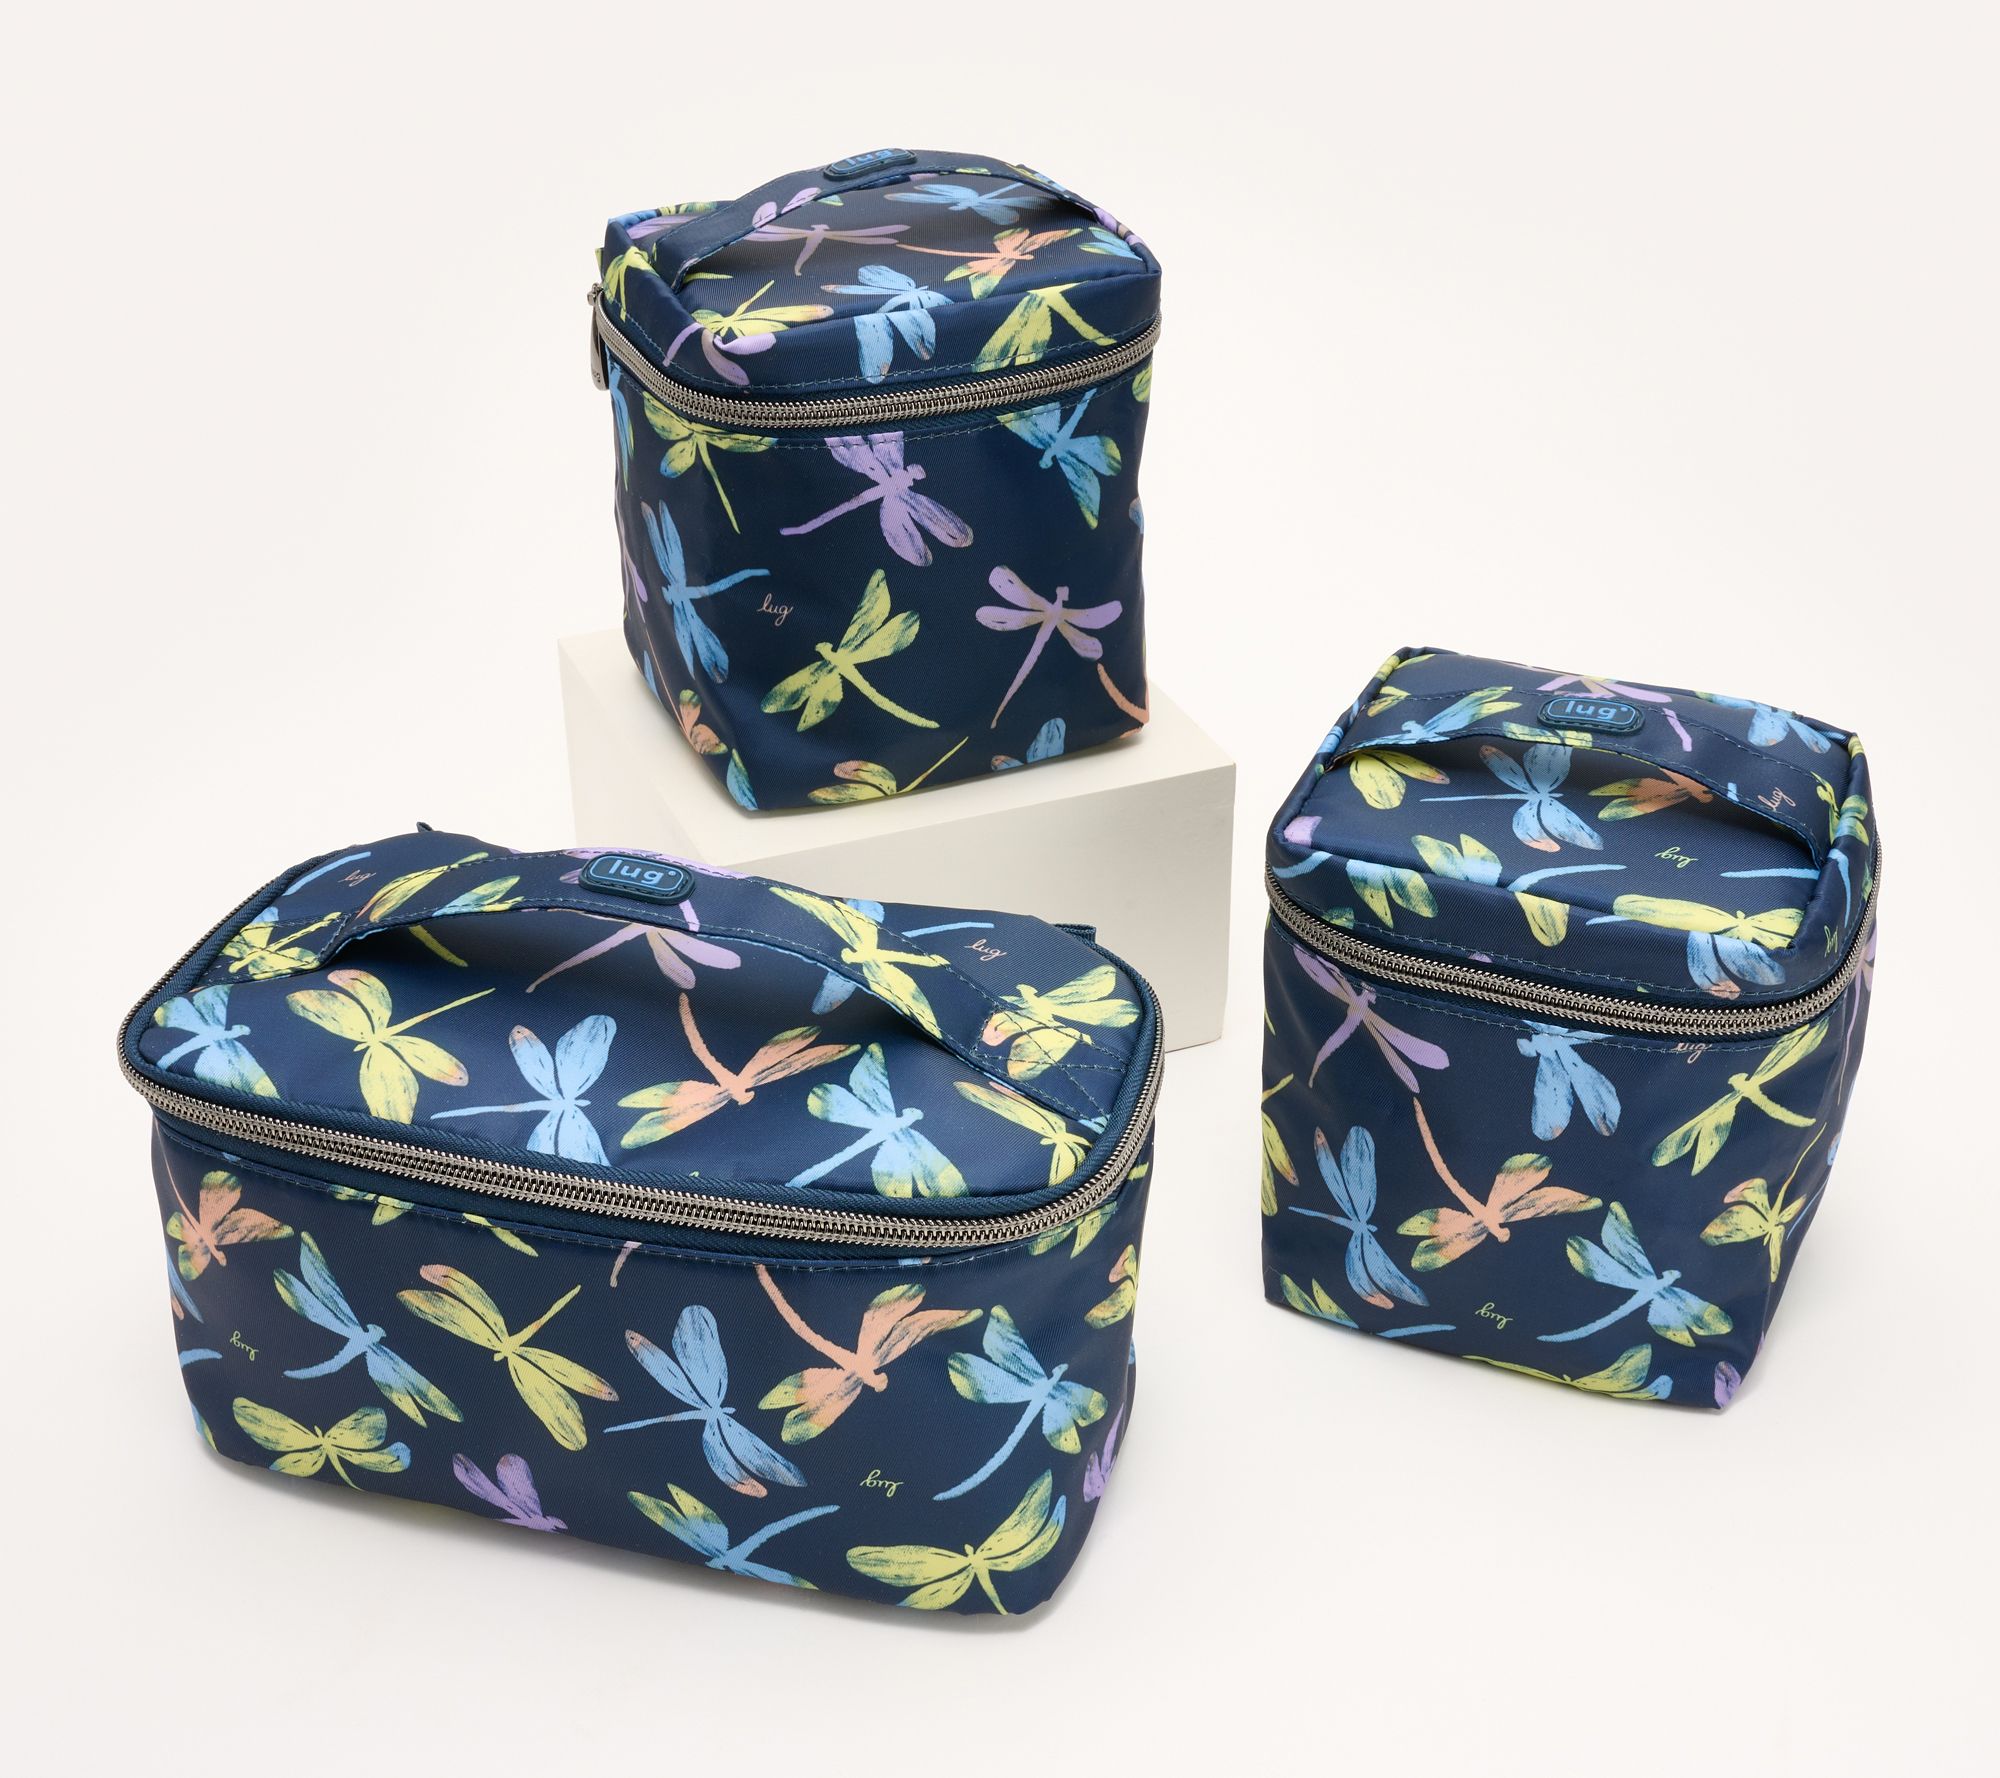 Lug Set of 3 Cosmetic Cases - Dolly & S/2 Box Top ,DragonflyIcePop